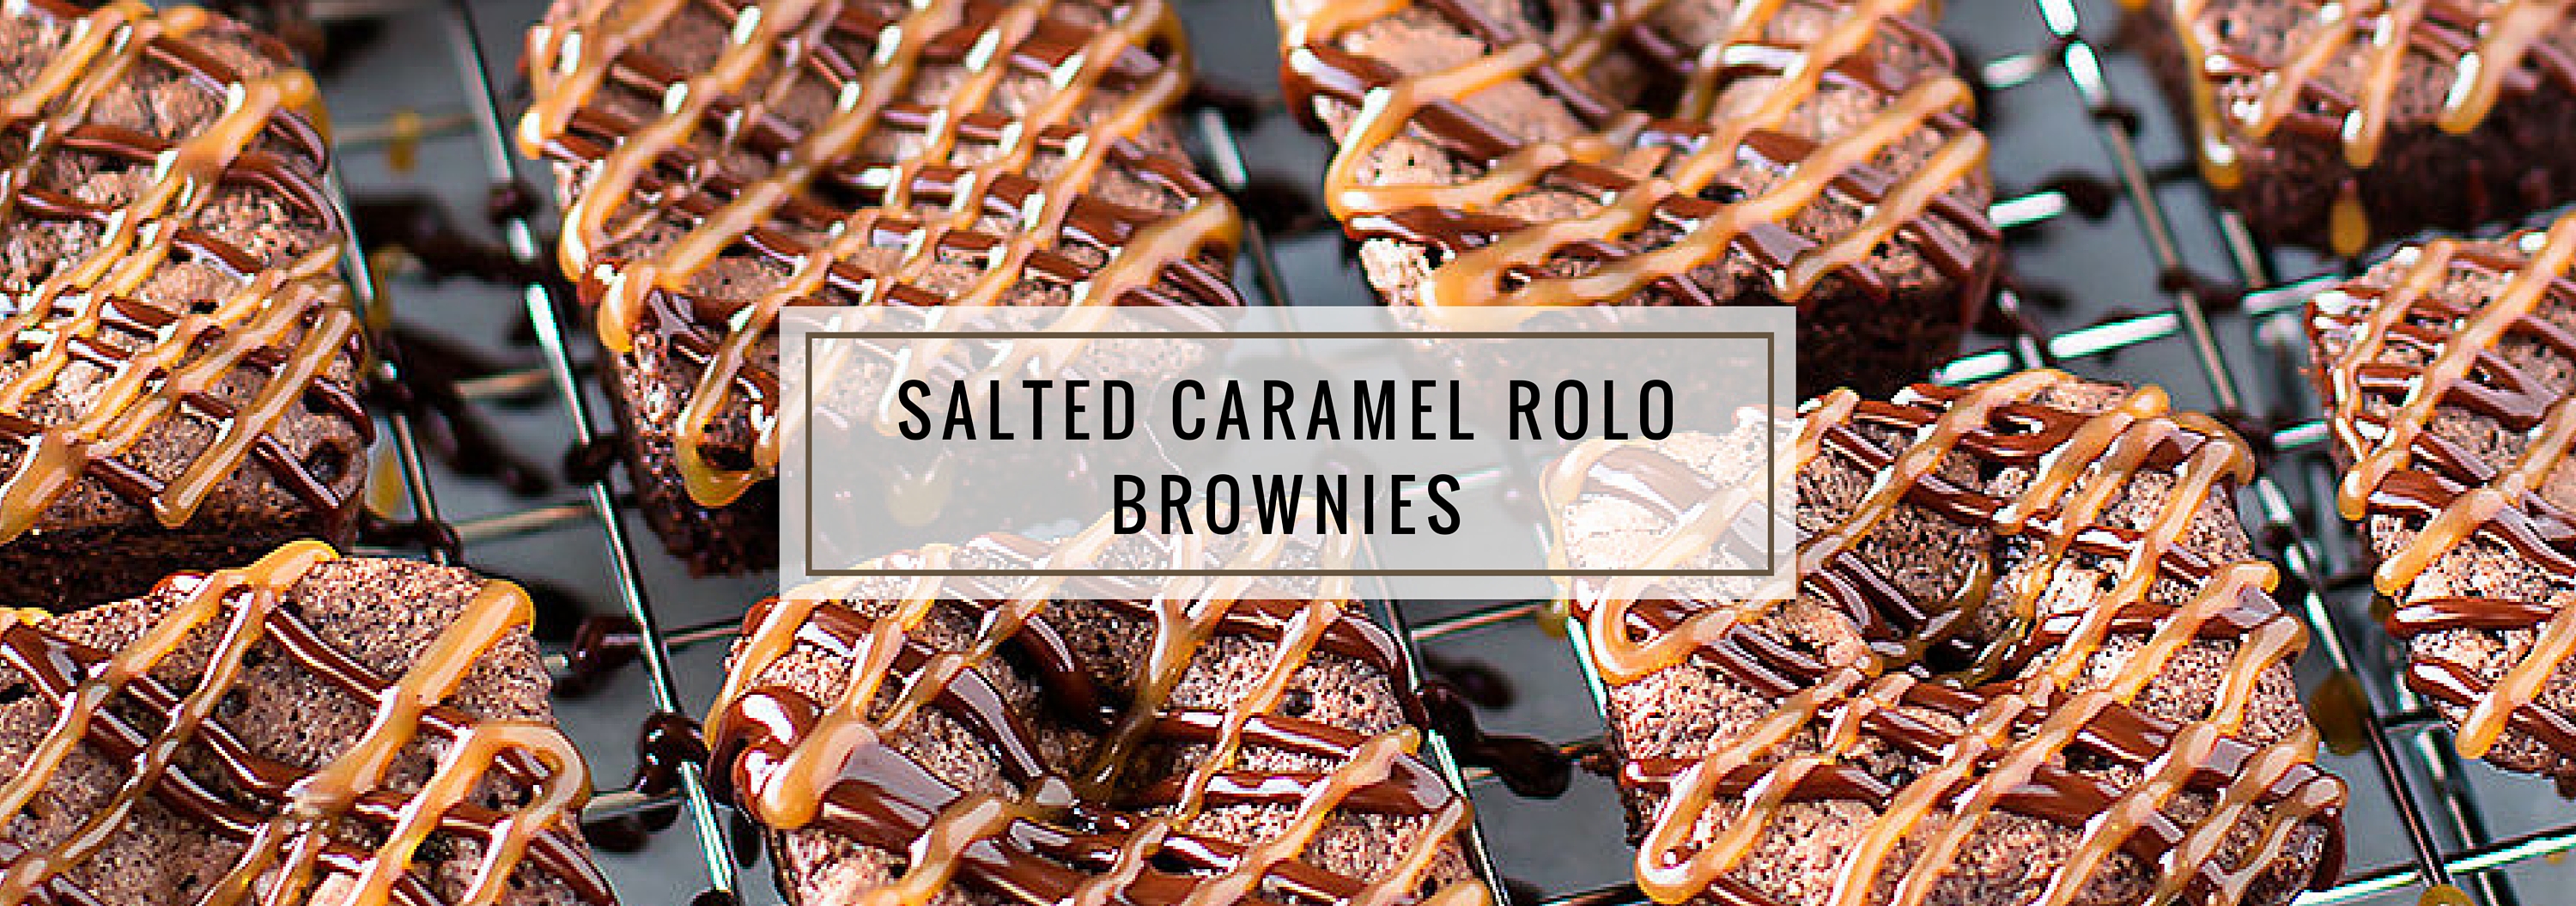 Salted Caramel ROLO Brownies